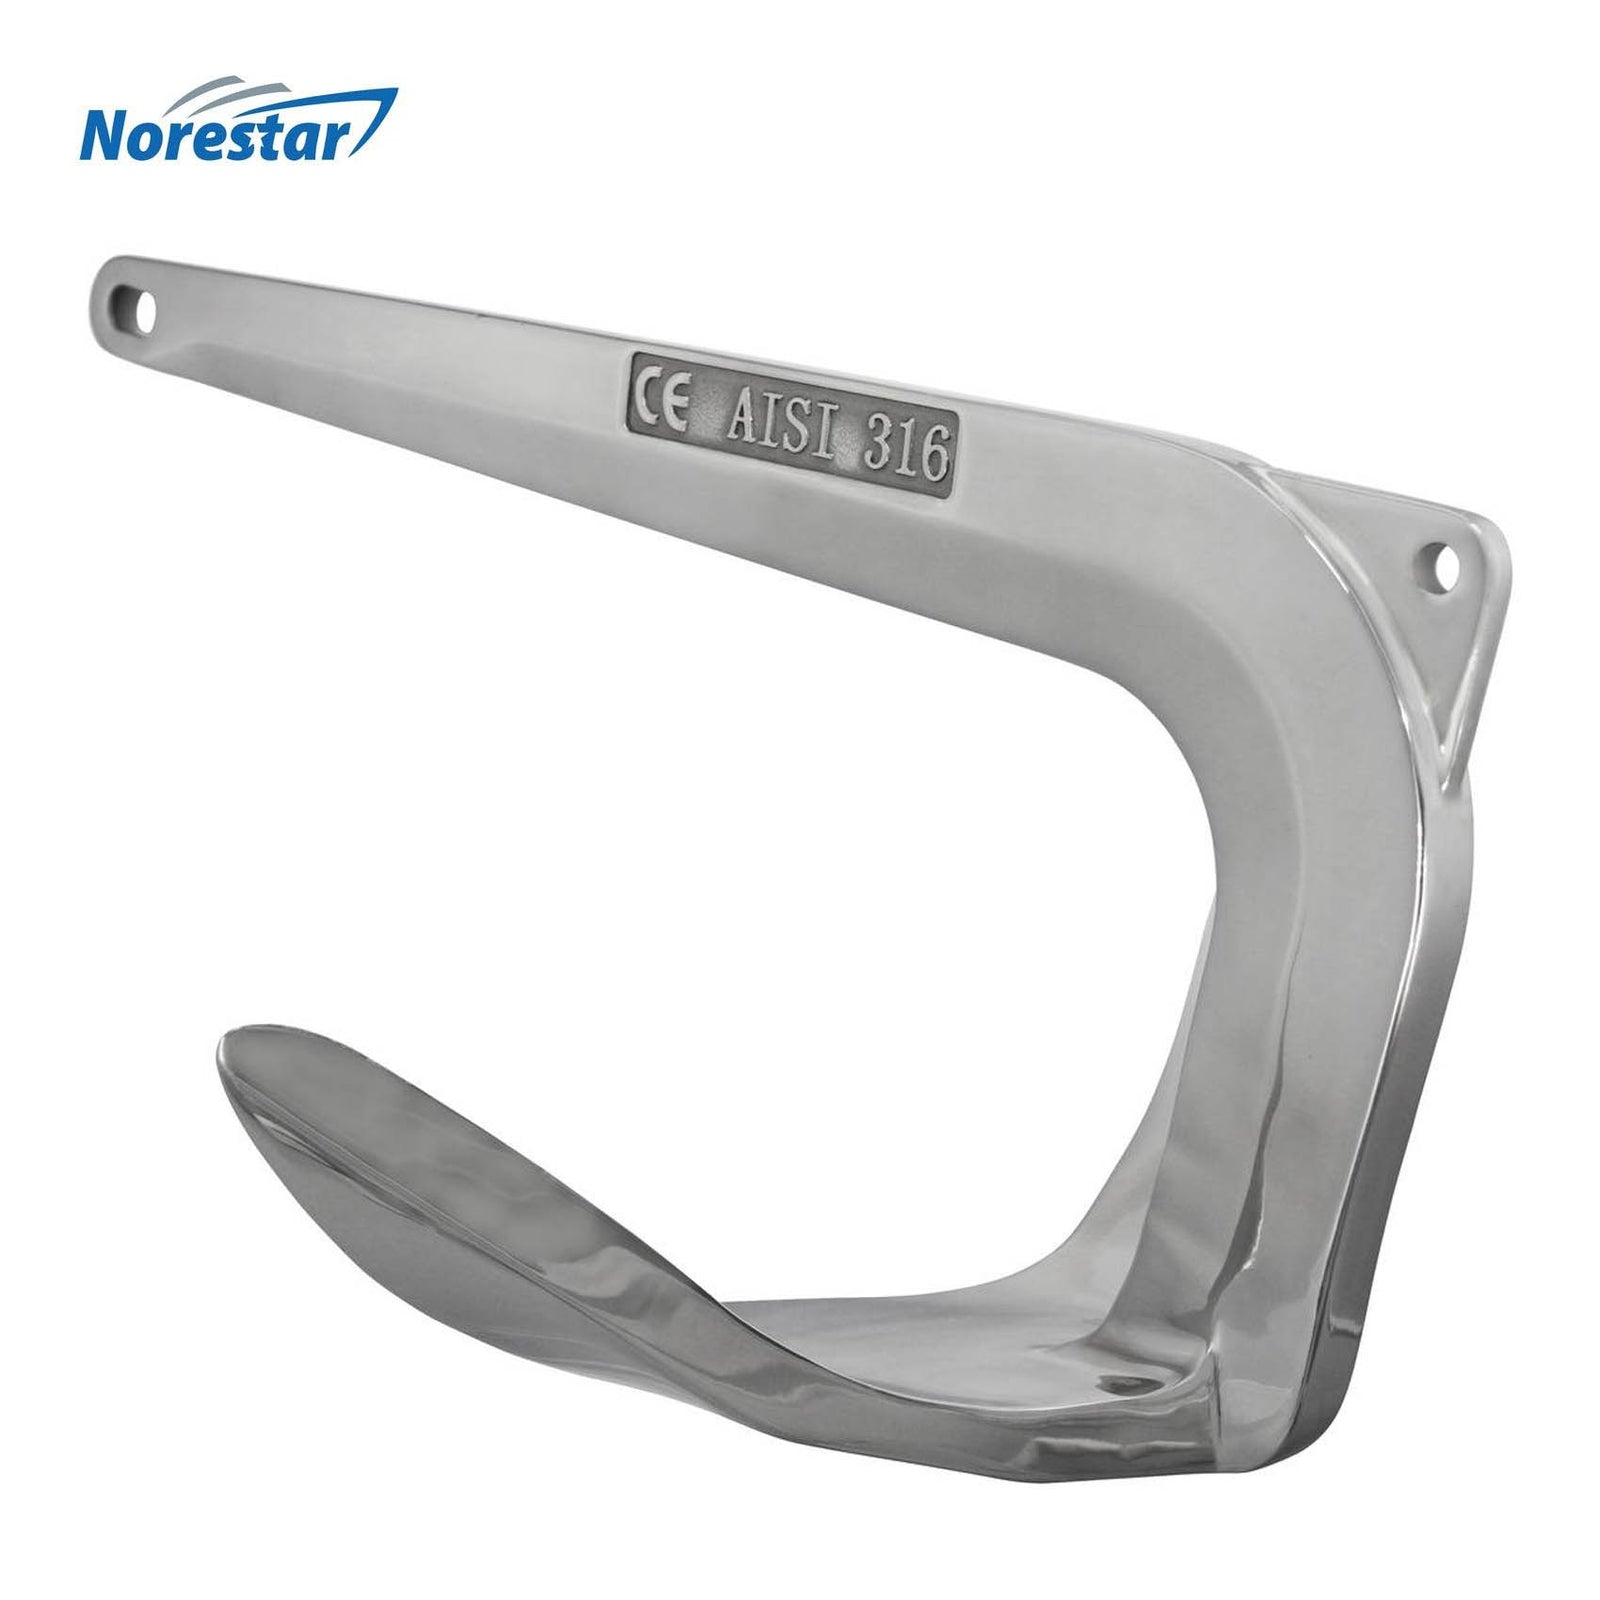 Stainless Steel Bruce/Claw Boat Anchor by Norestar